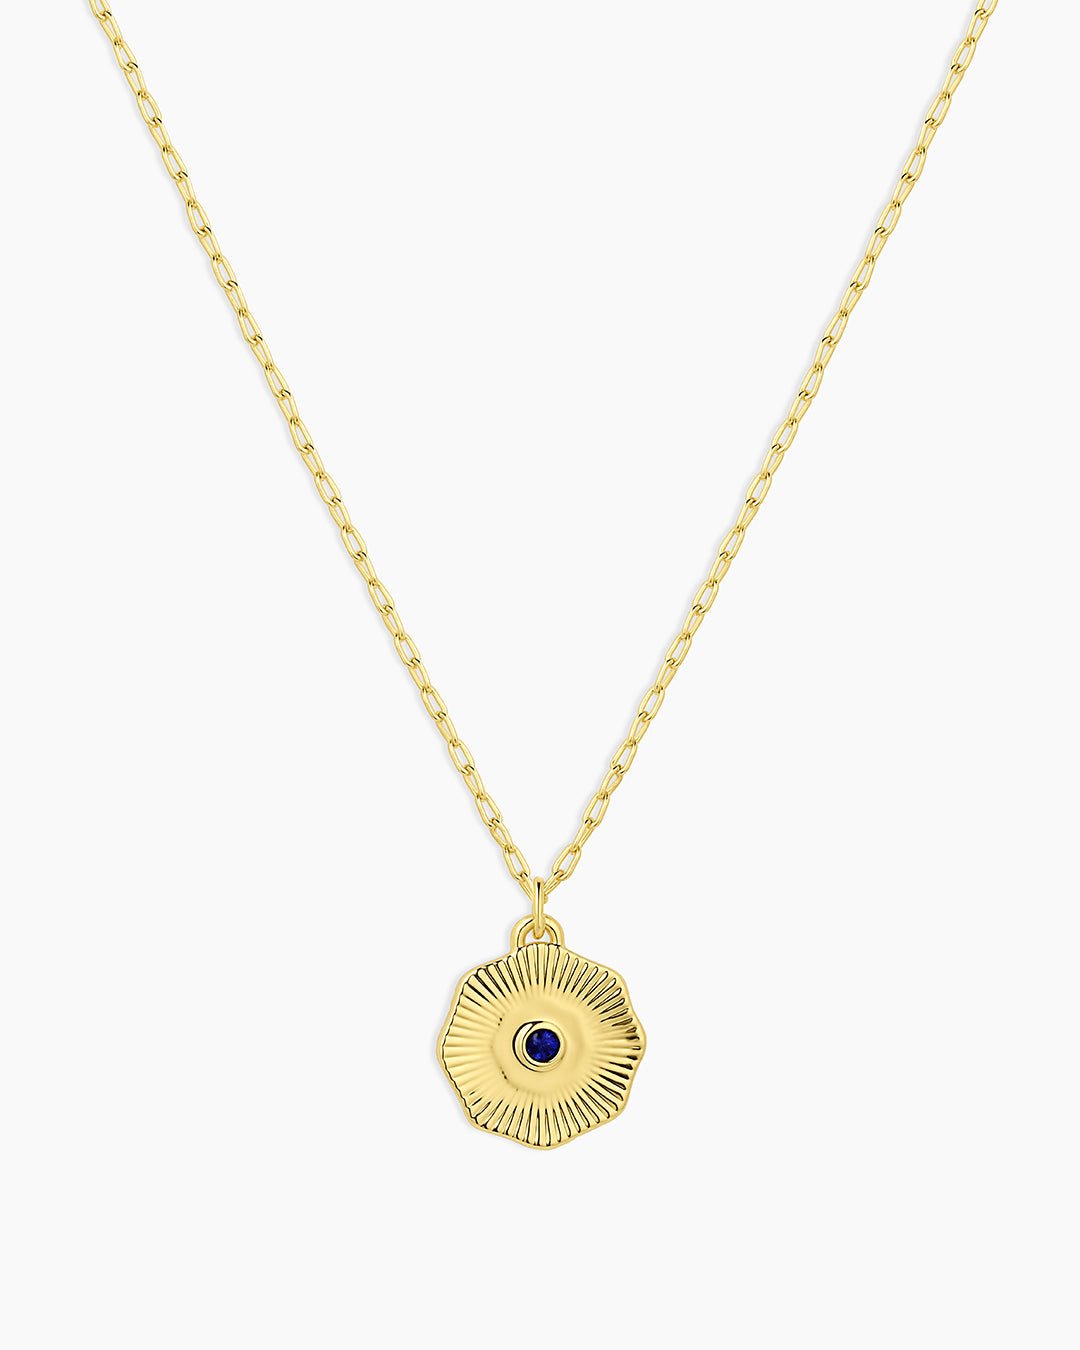 Birthstone Coin Necklace || option::Gold Plated, Blue Sapphire - September